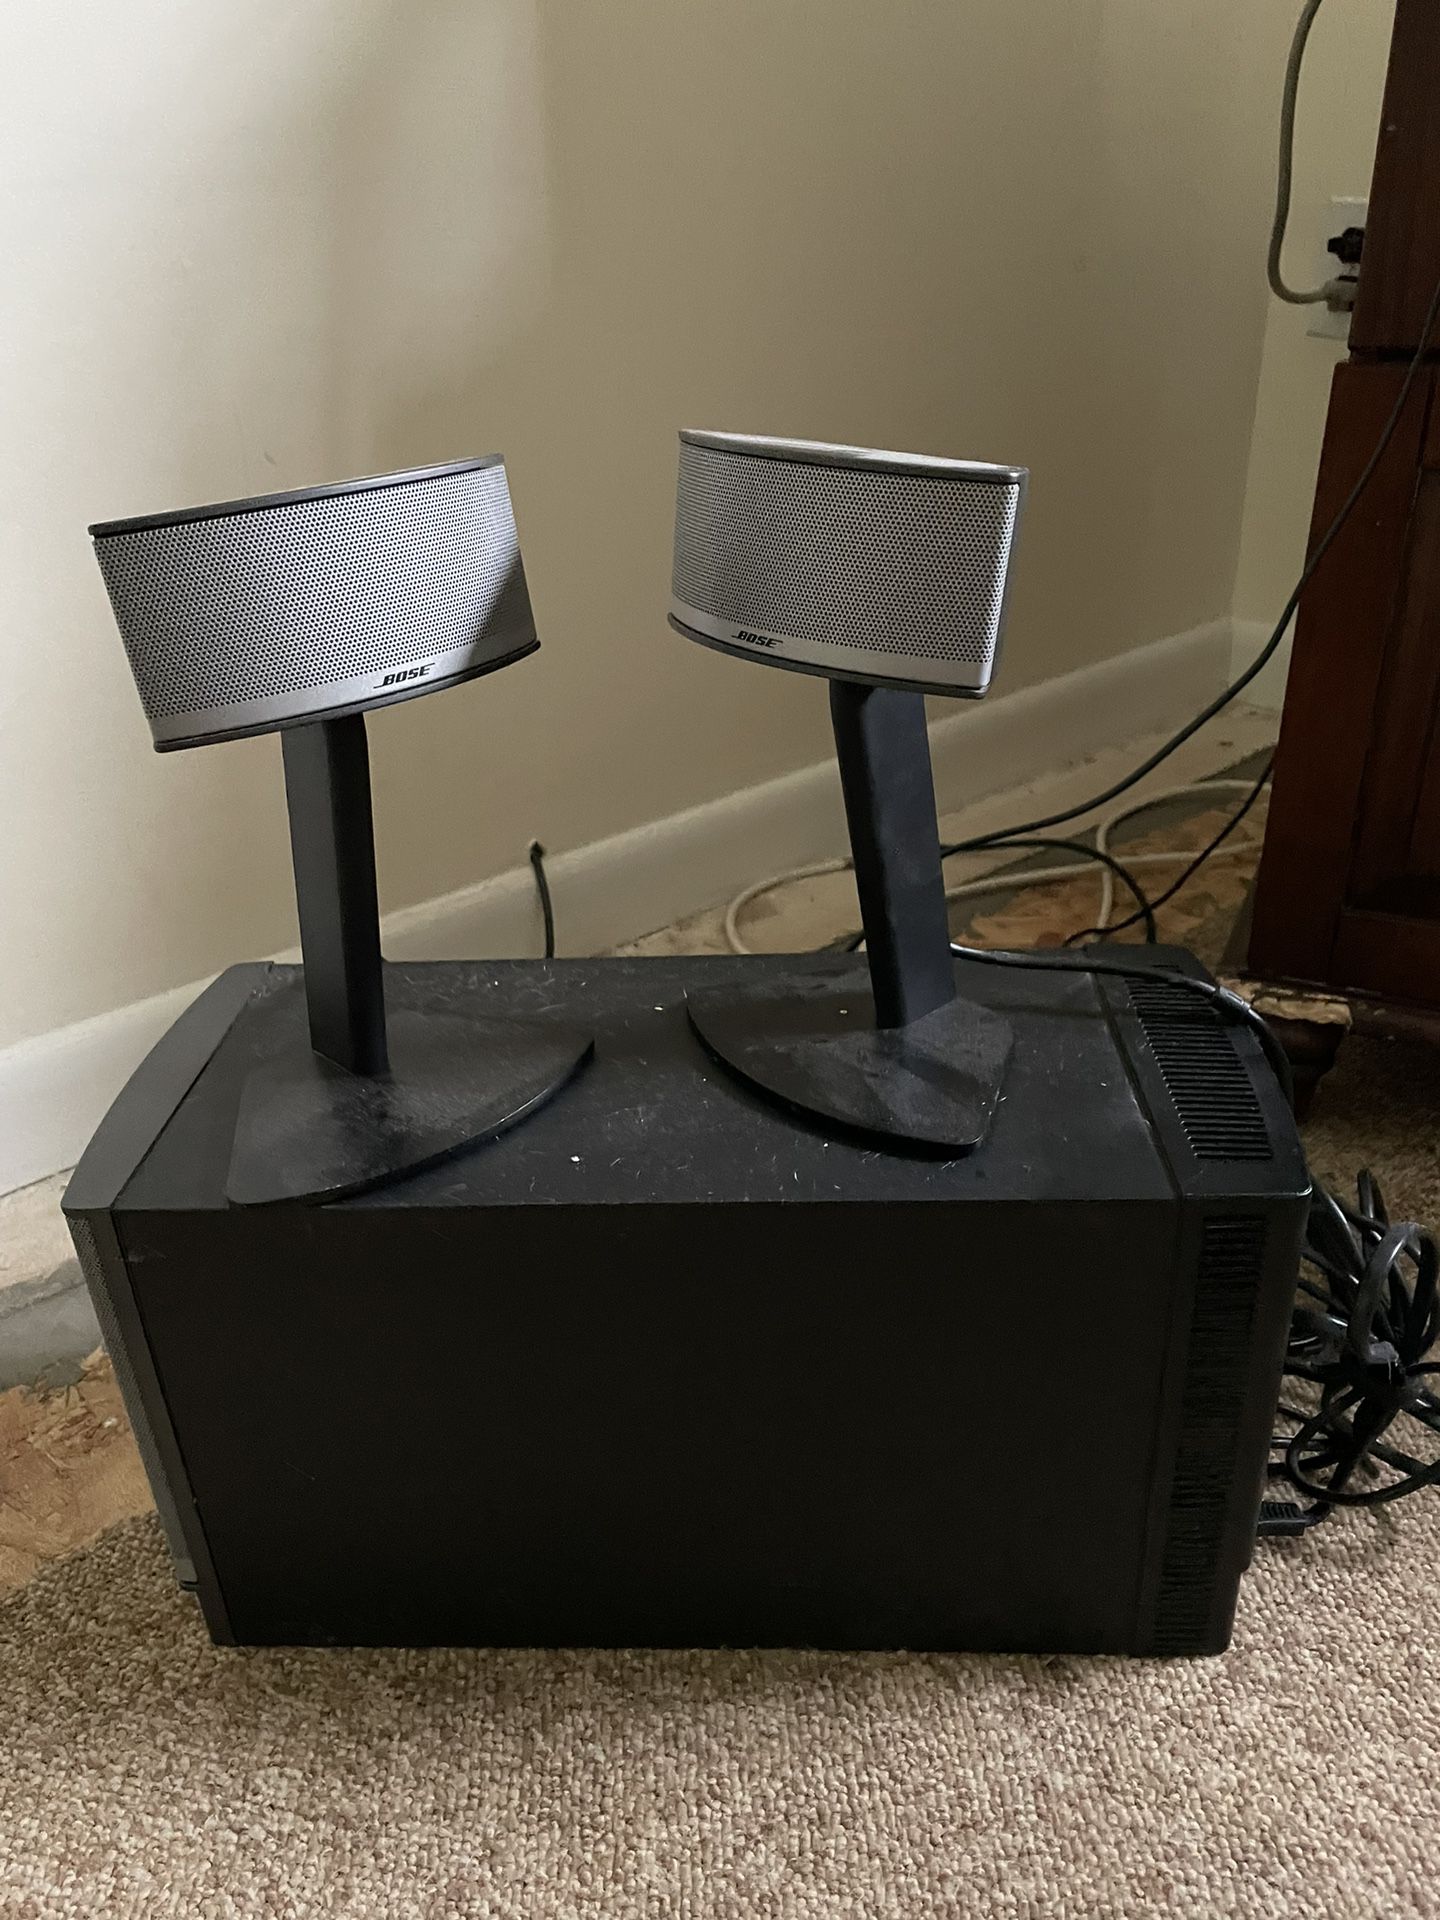 Bose Companion 5 (Subwoofer + 2 Speakers + Control Pod) for Sale